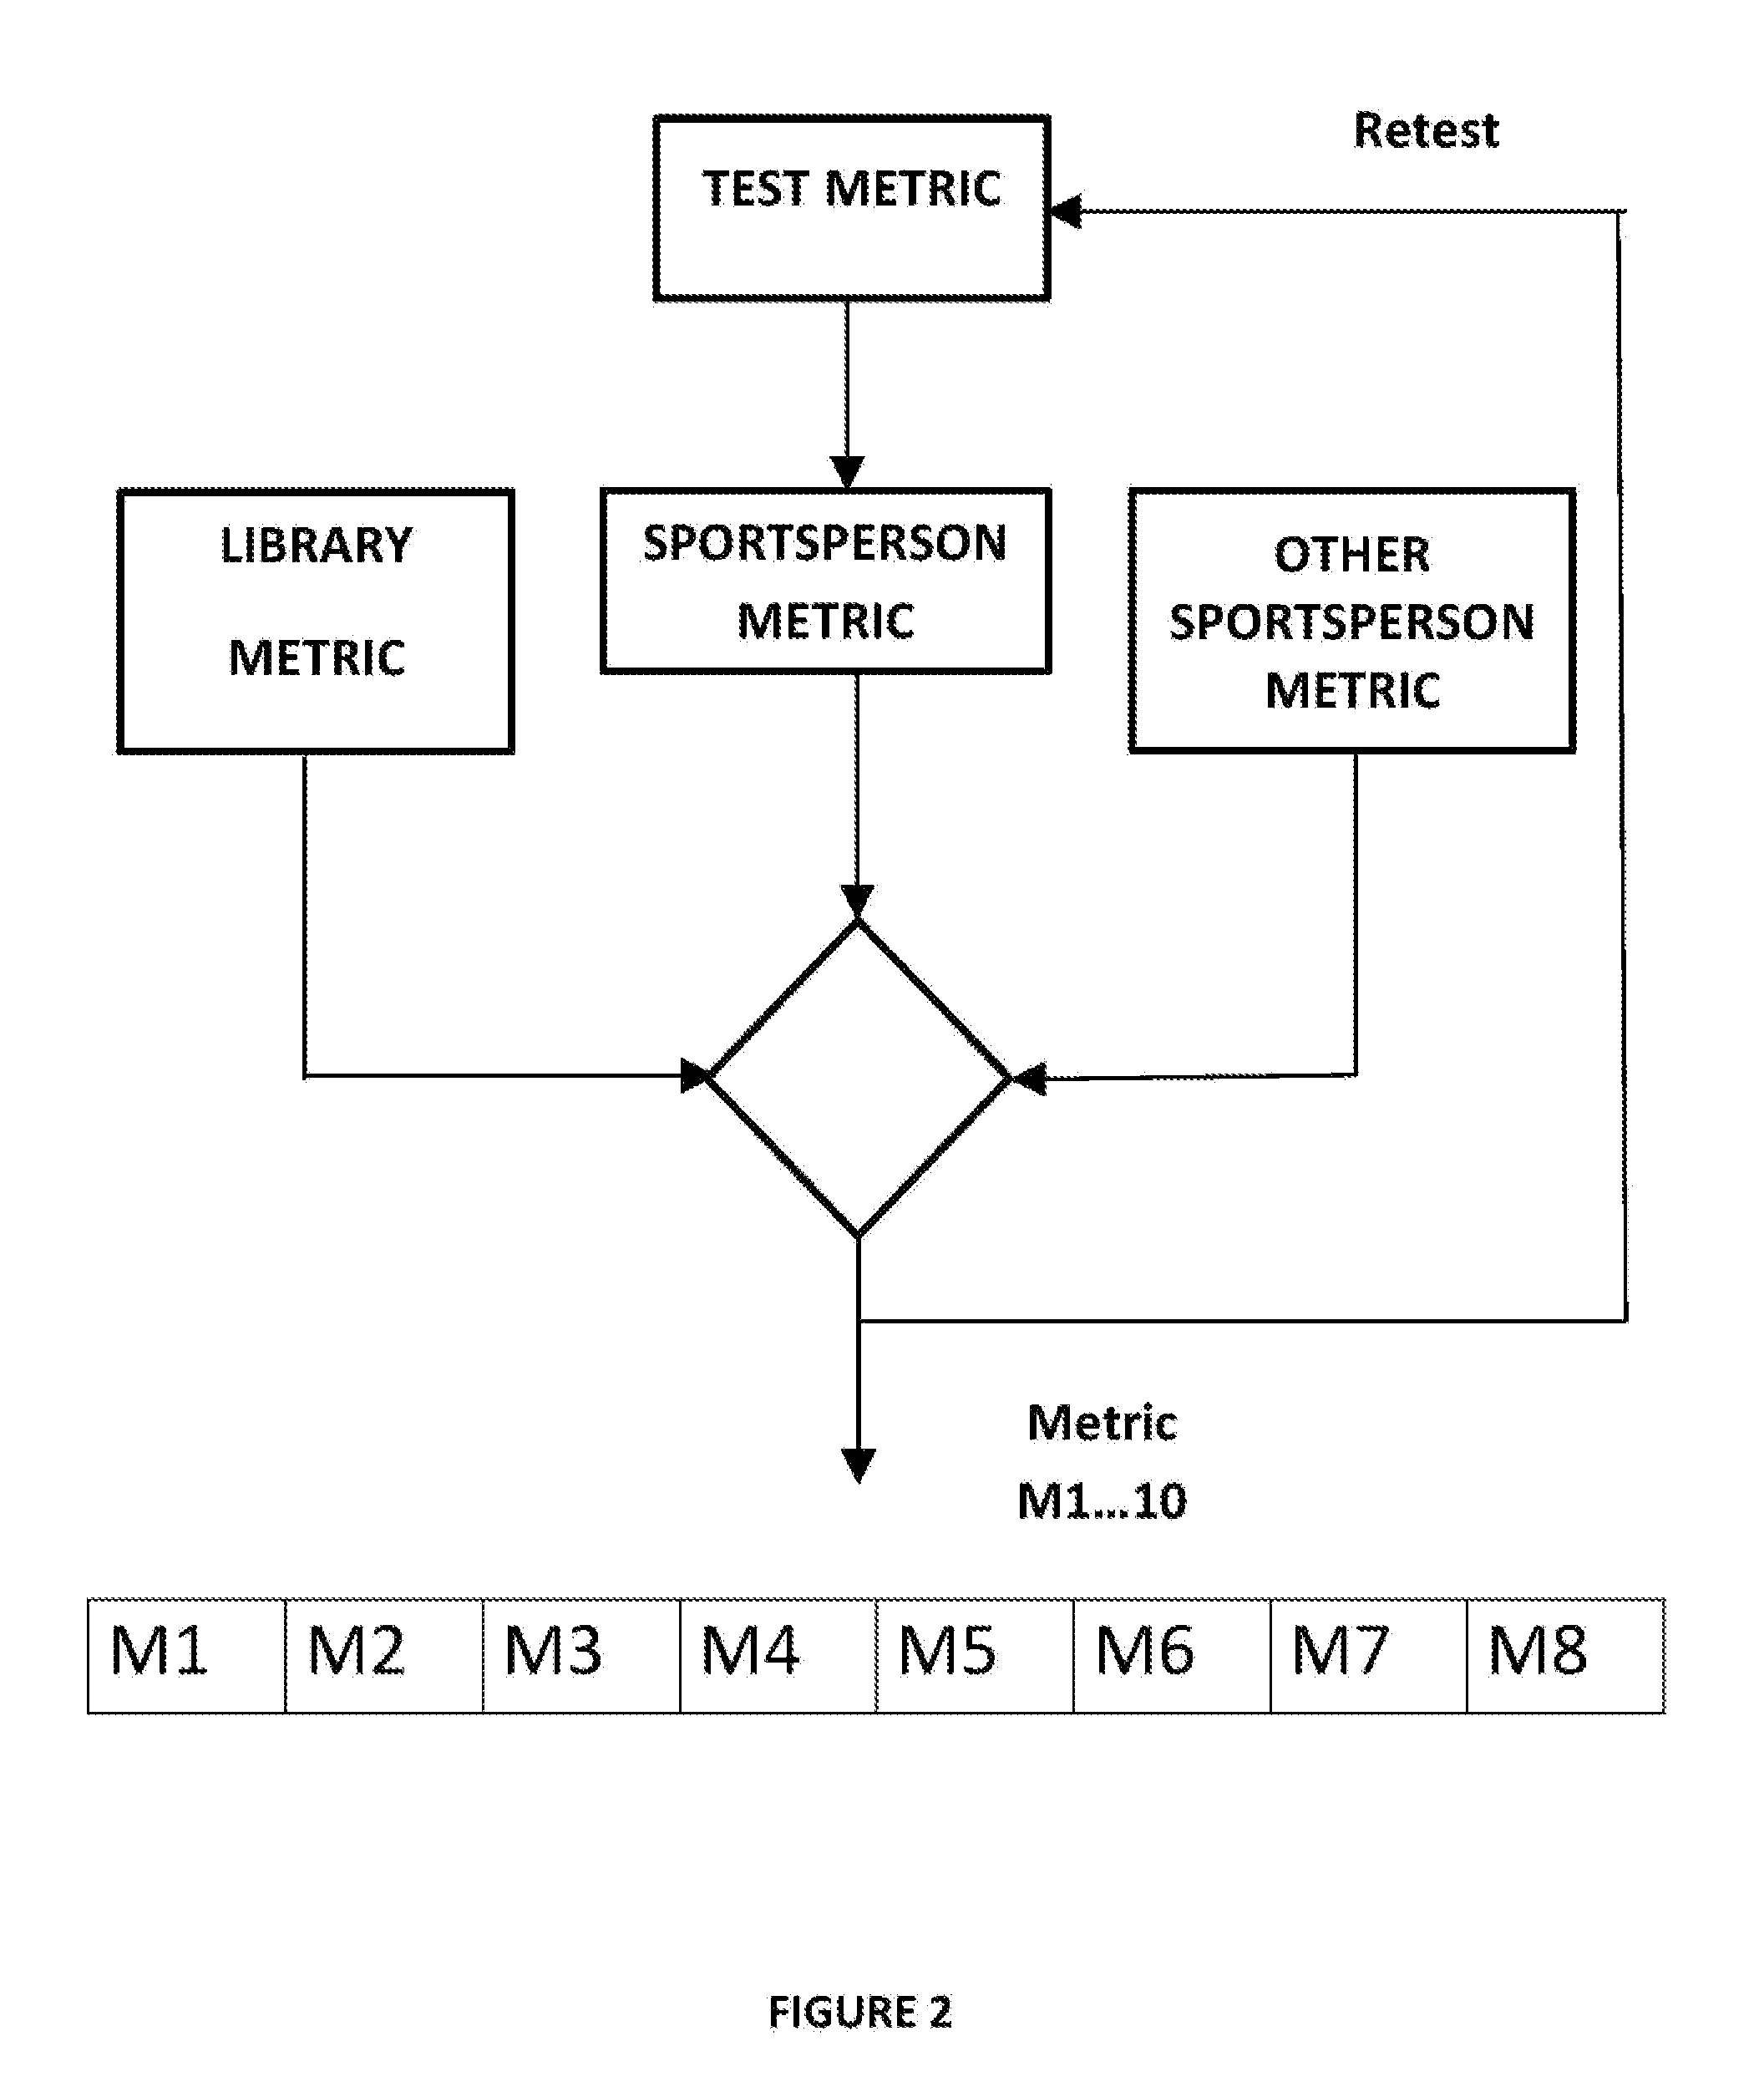 A computer implemented method of determining athletic aptitude